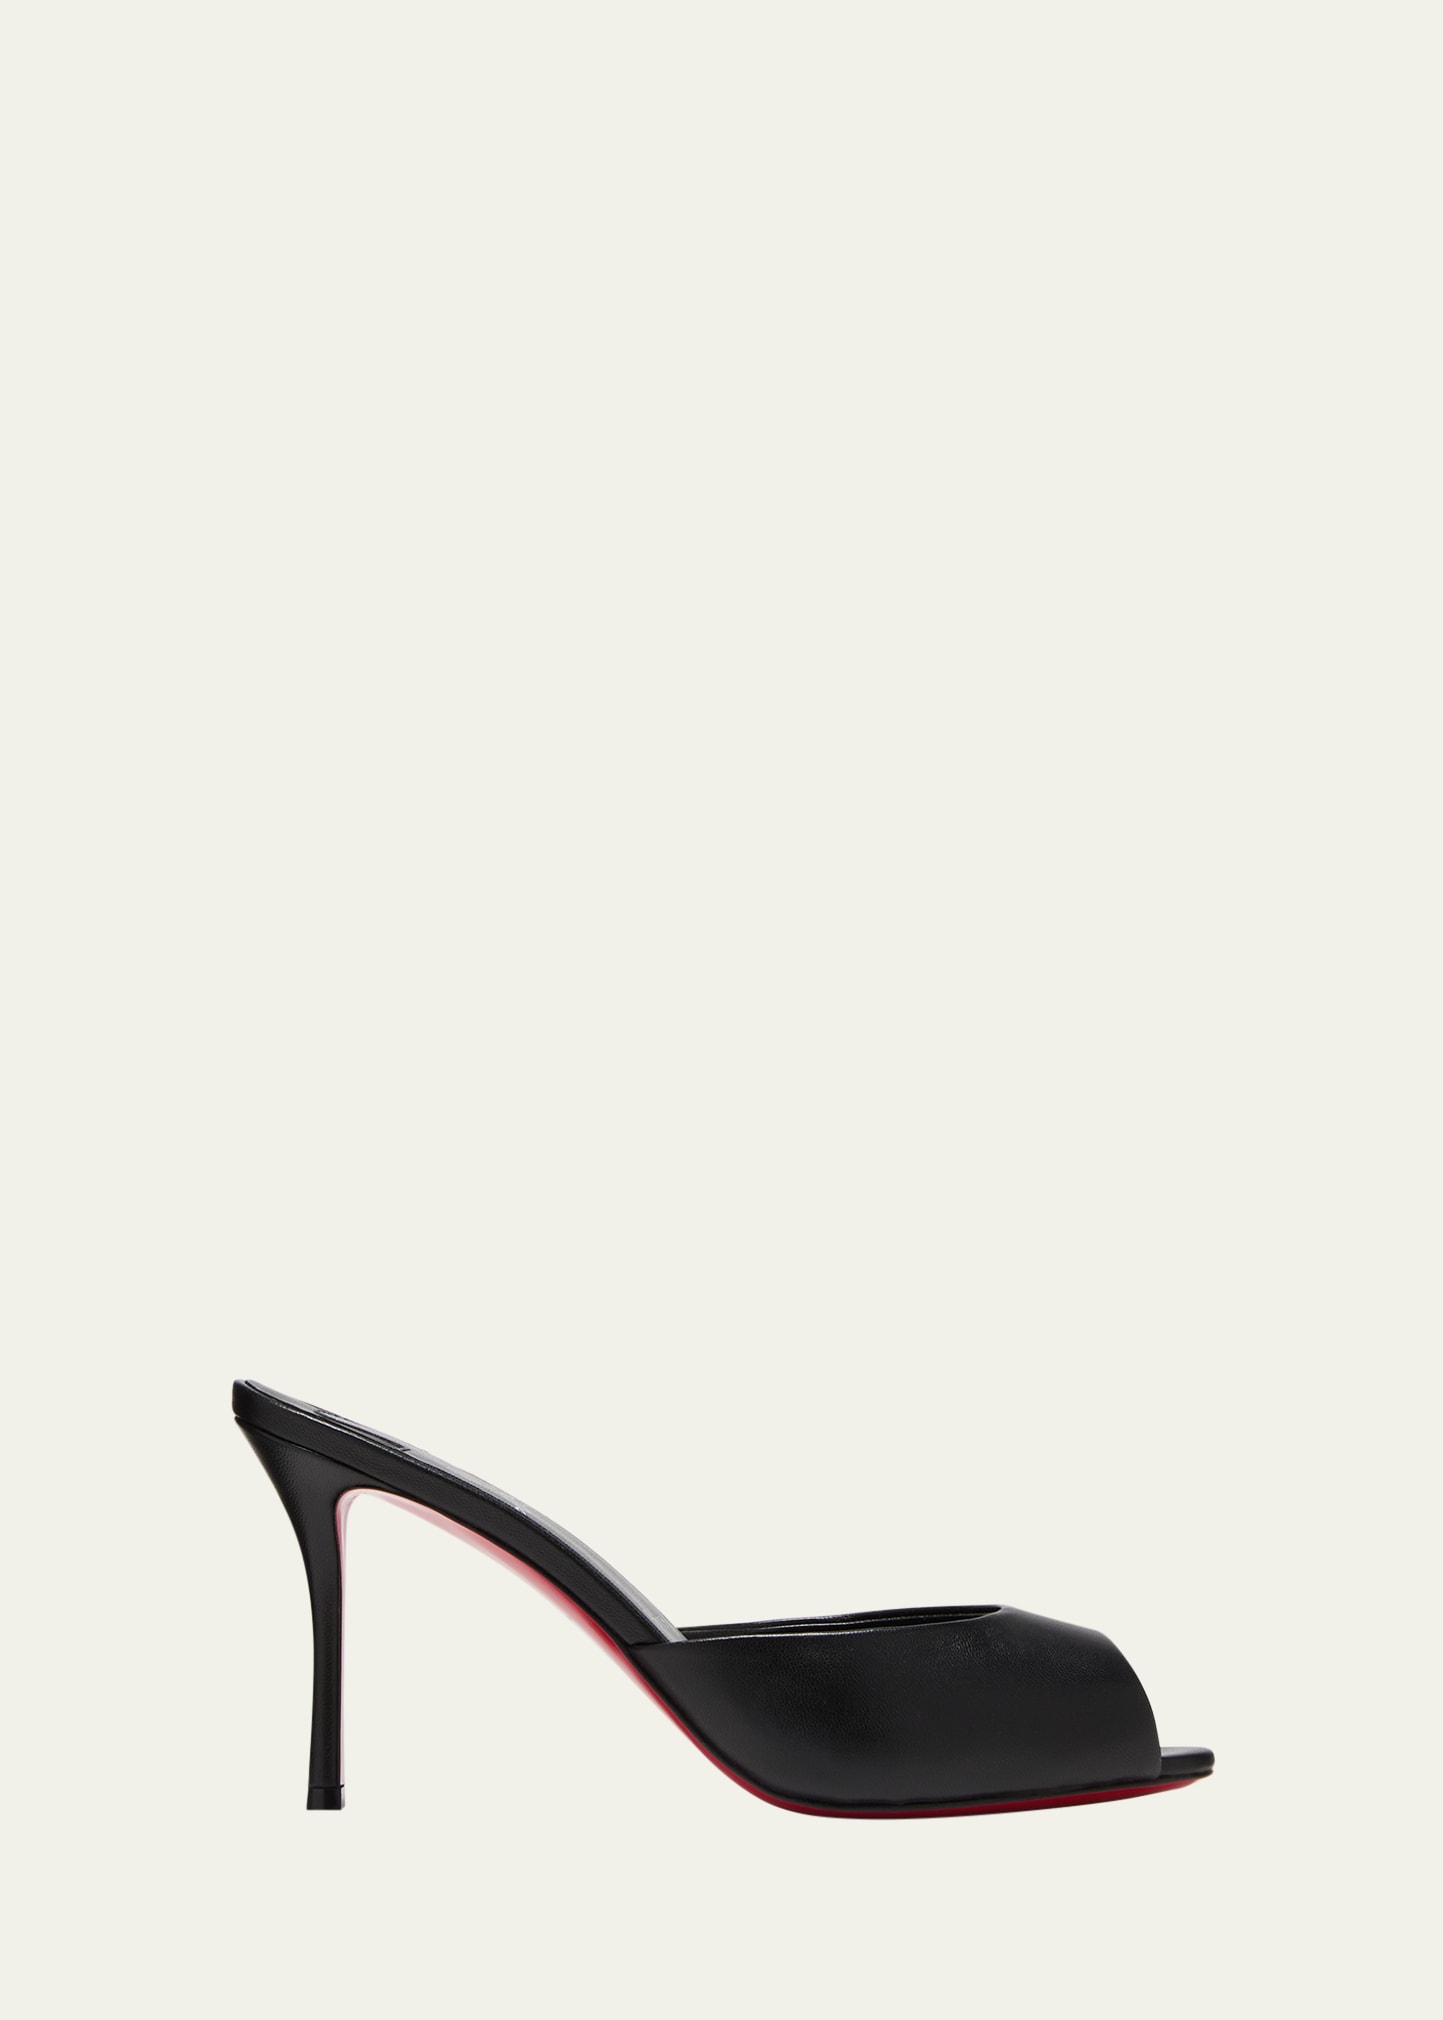 CHRISTIAN LOUBOUTIN ME DOLLY NAPA RED SOLE SLIDE SANDALS